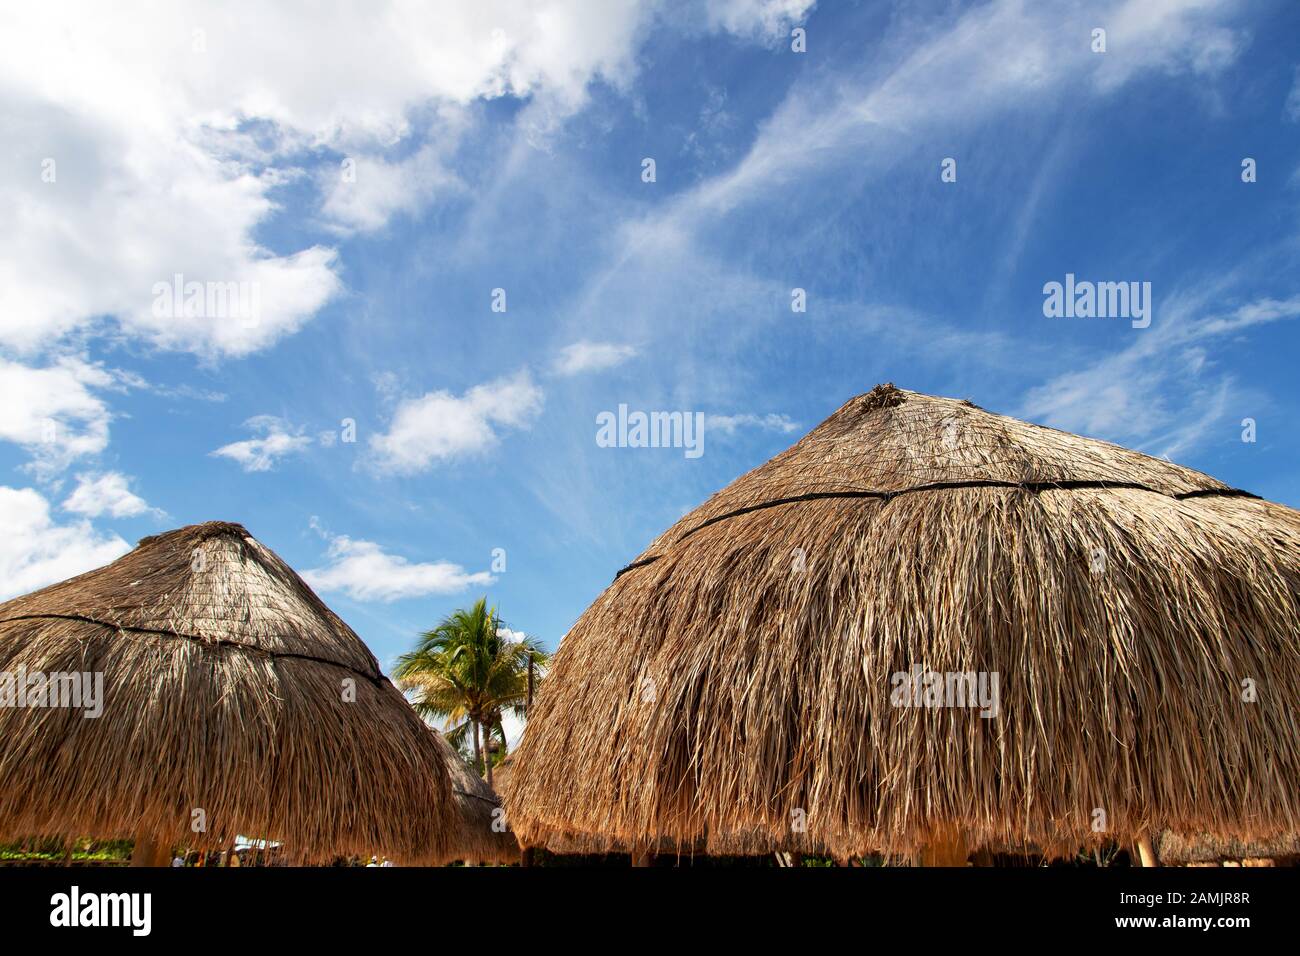 Close up of coconut palm leaf straw beach umbrella against blue skies with copy space in a Cancun beach in Mexico. Stock Photo